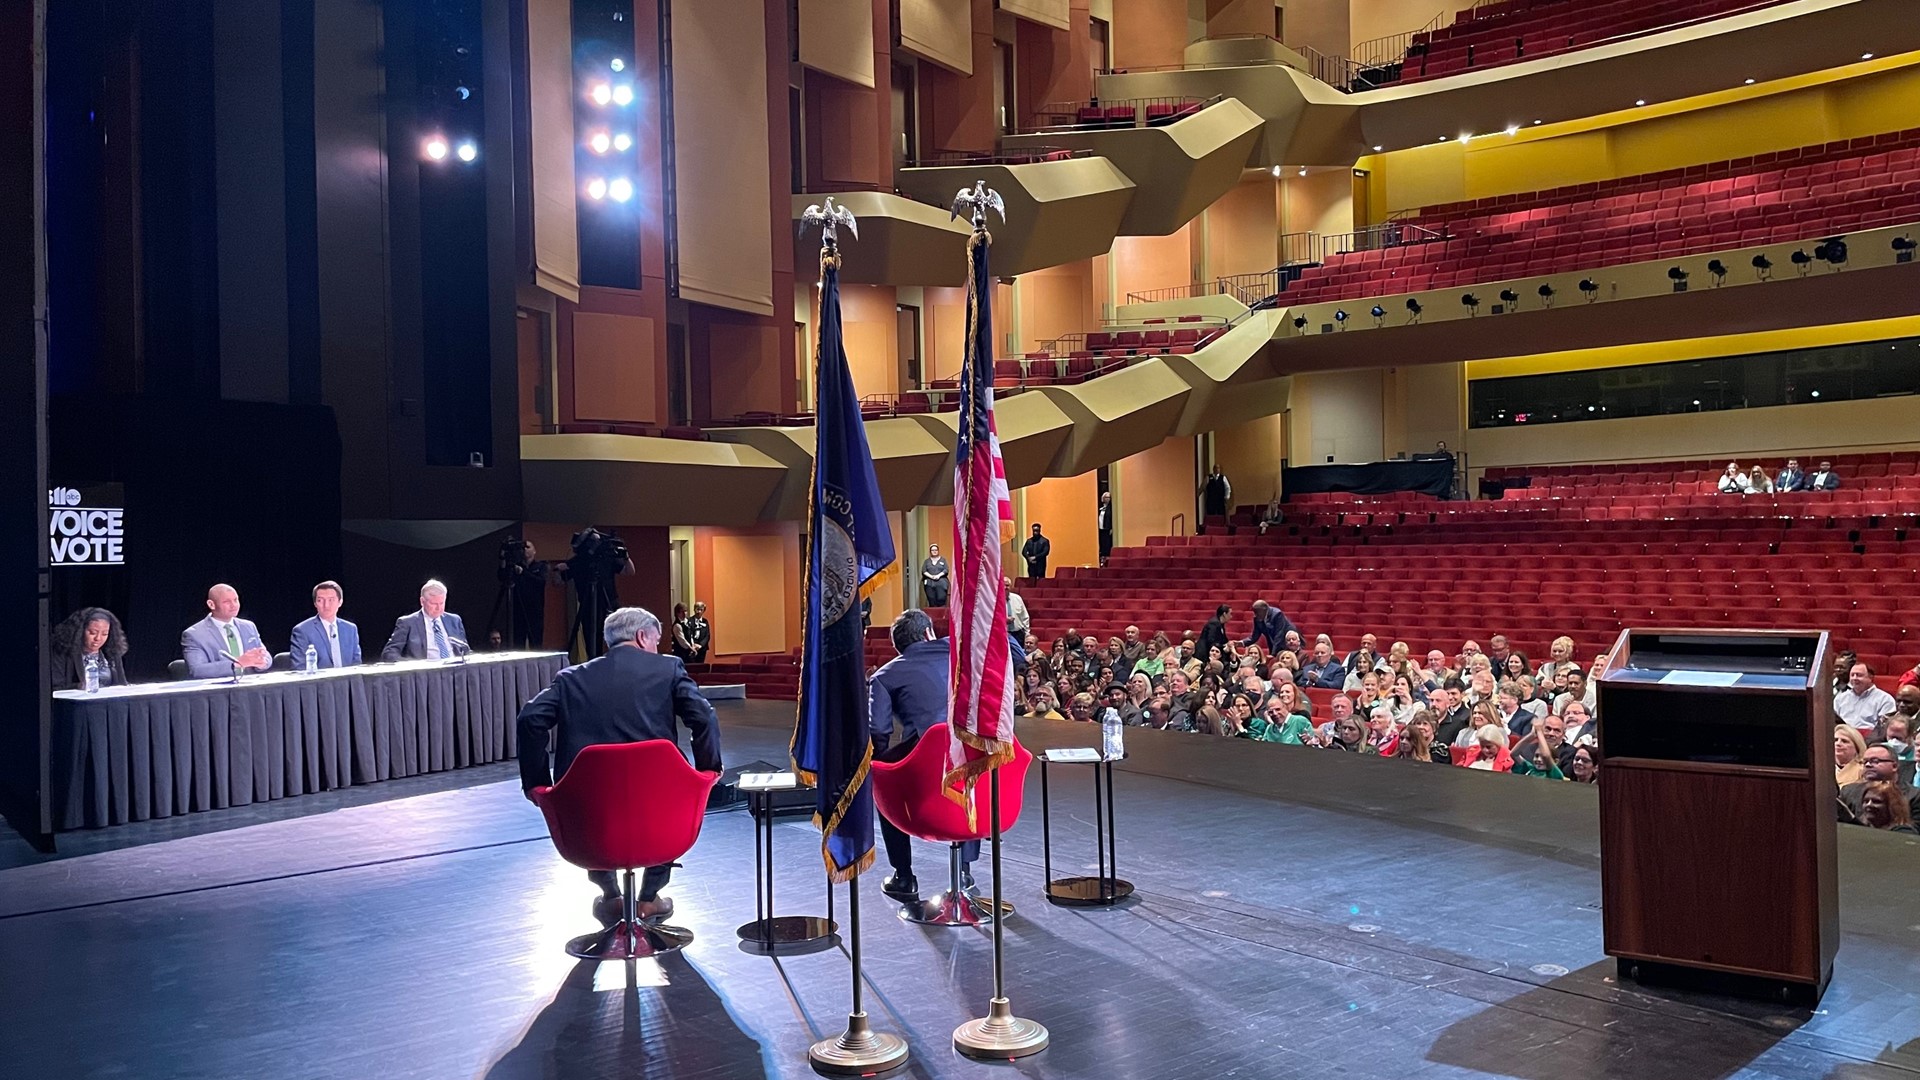 Before a live audience at the Kentucky Center downtown, Republican Bill Dieruf and Democrat Craig Greenberg discussed what they want to do if elected mayor.